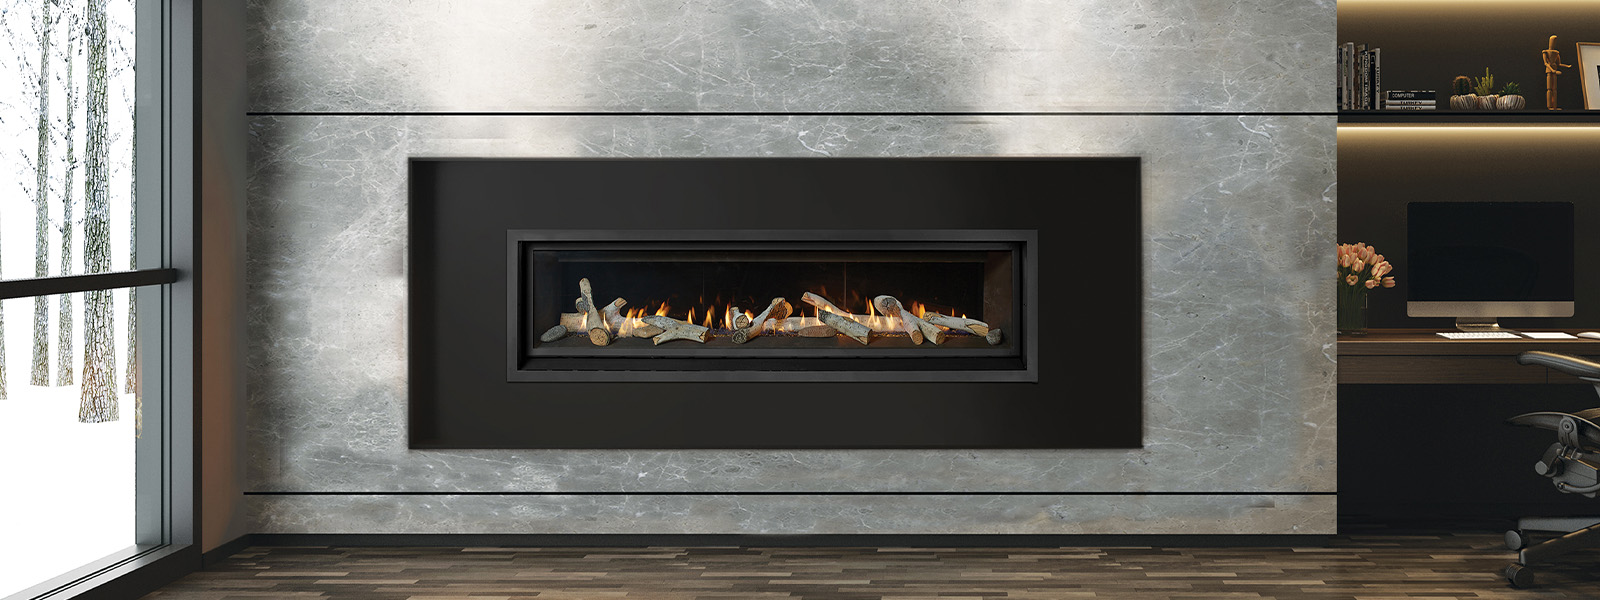 FireplaceX Linear Probuilder Gas Fireplaces